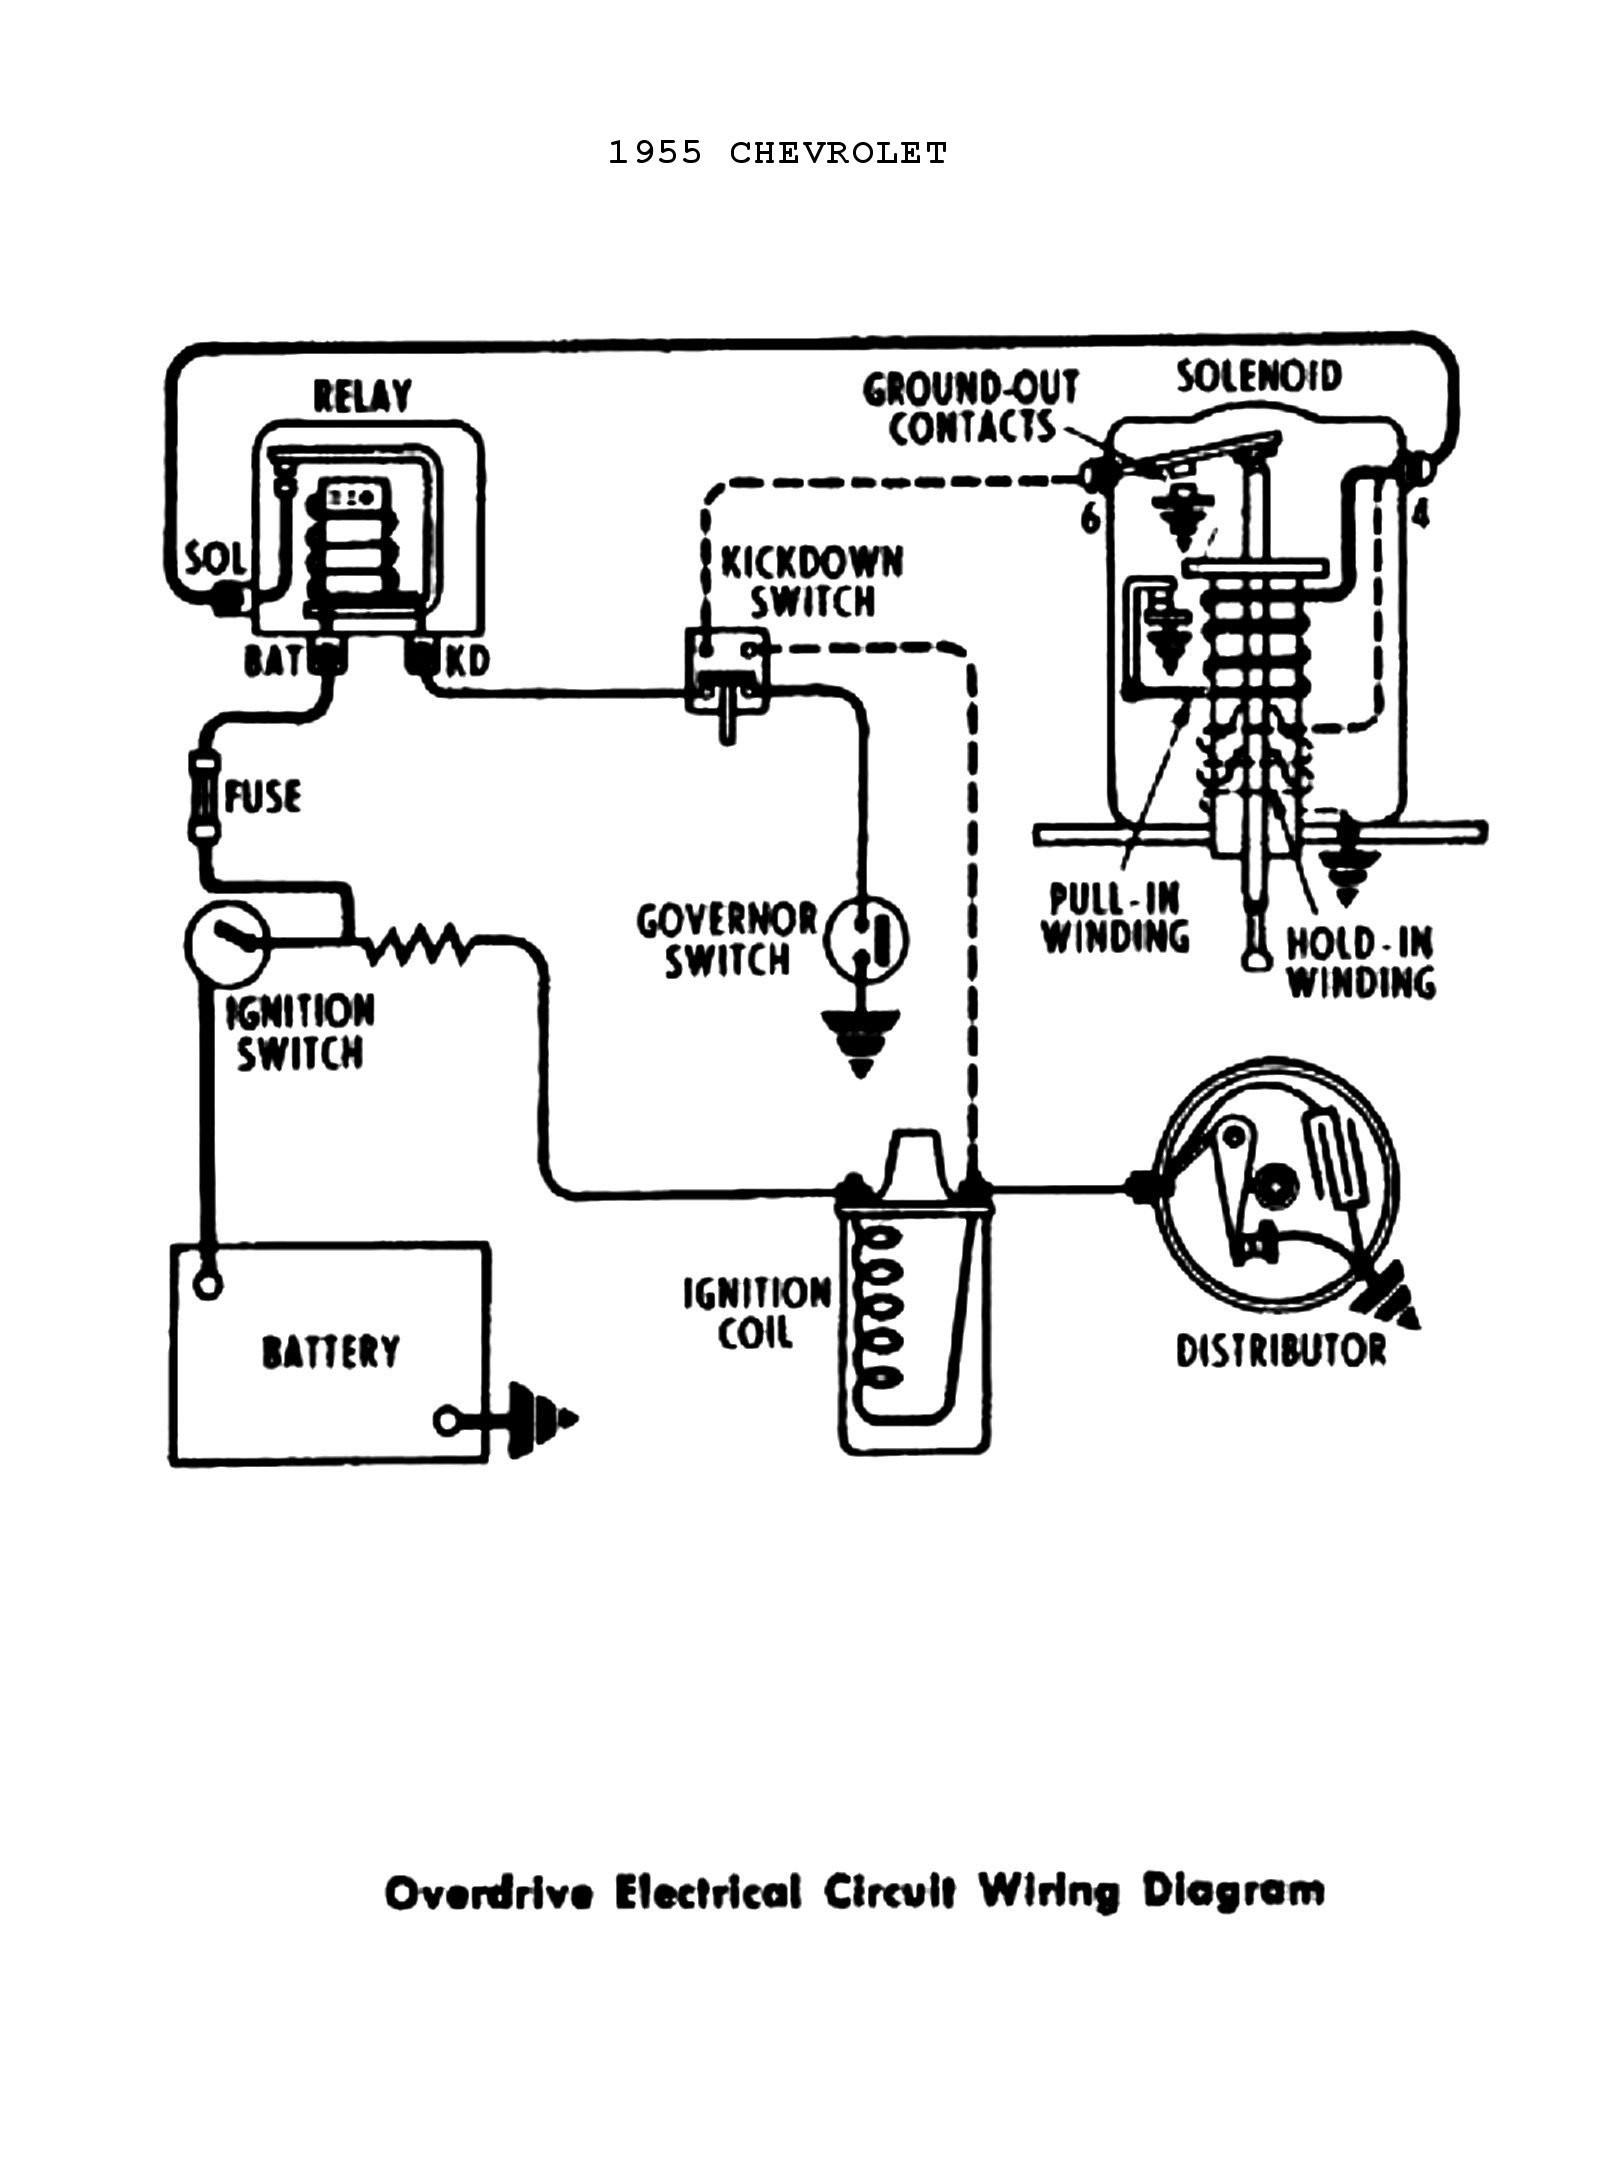 Chevy Tilt Steering Column Wiring Diagram Reference Chevy Wiring Diagrams